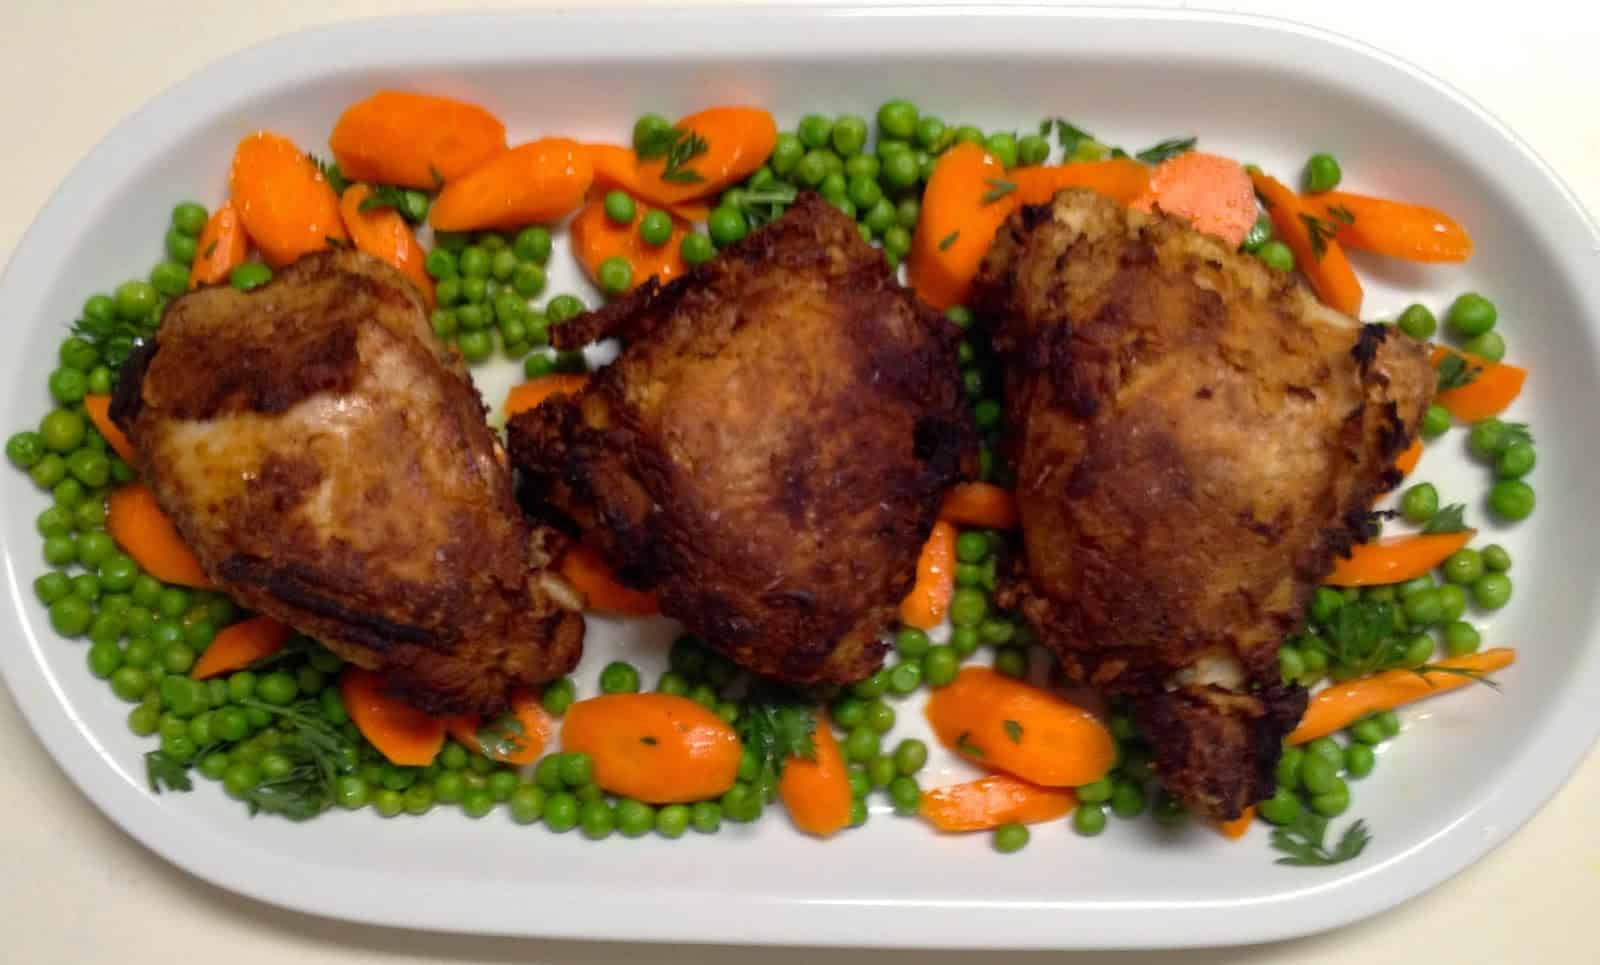 Hugh Acheson’s Crispy Chicken Thighs with Peas, Carrots and Hot-Sauce Butter